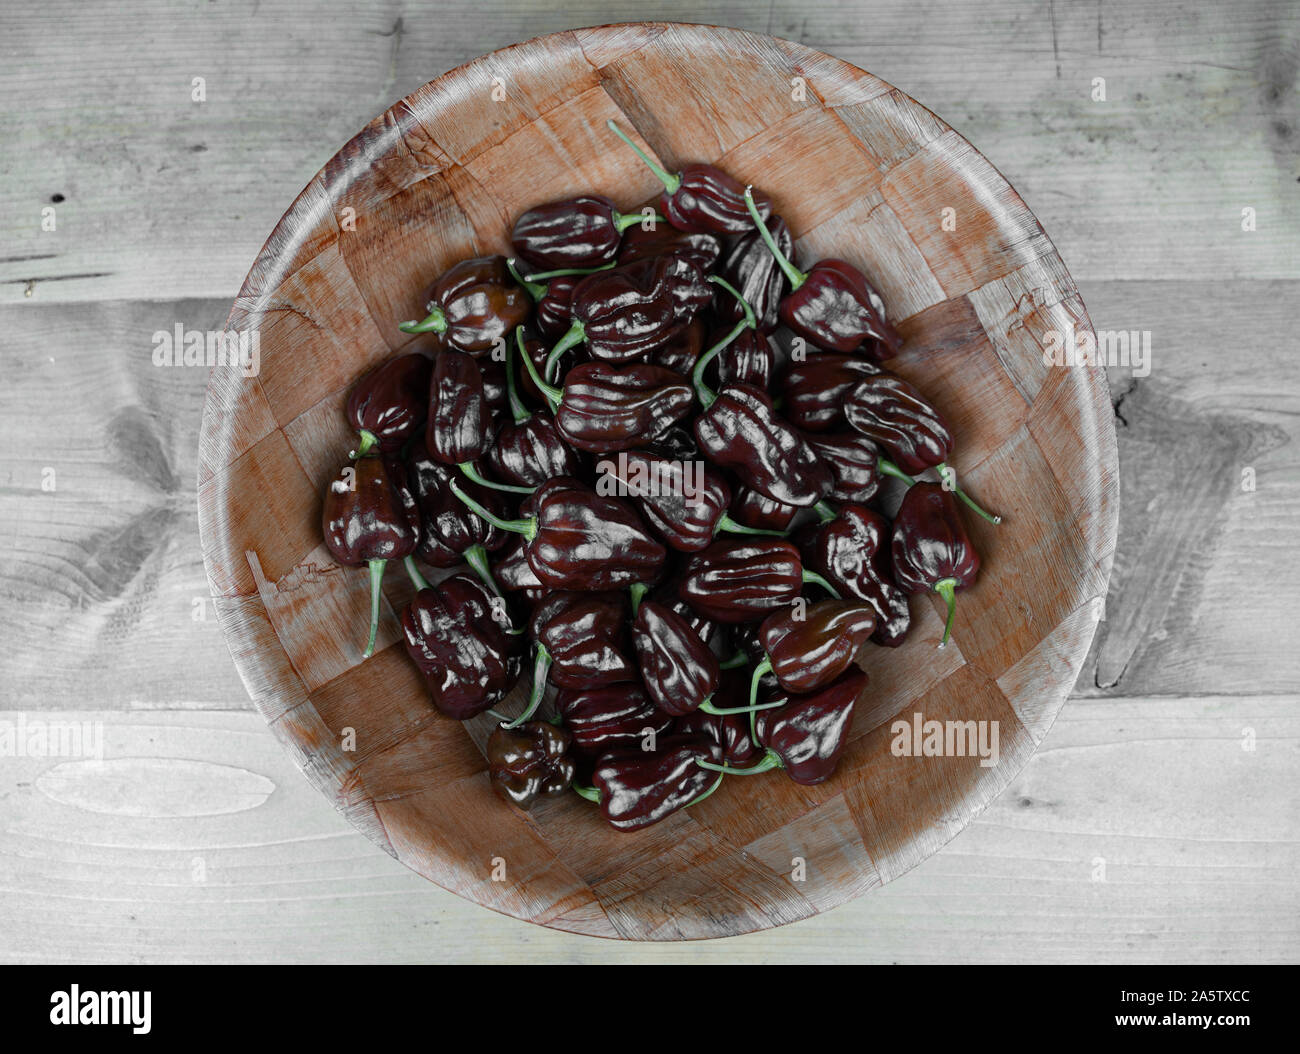 A bowl of chocolate habanero peppers (Capsicum chinense) on a wooden table. Chocolate brown hot chili peppers. Tasty paprika, one of the hottest Stock Photo